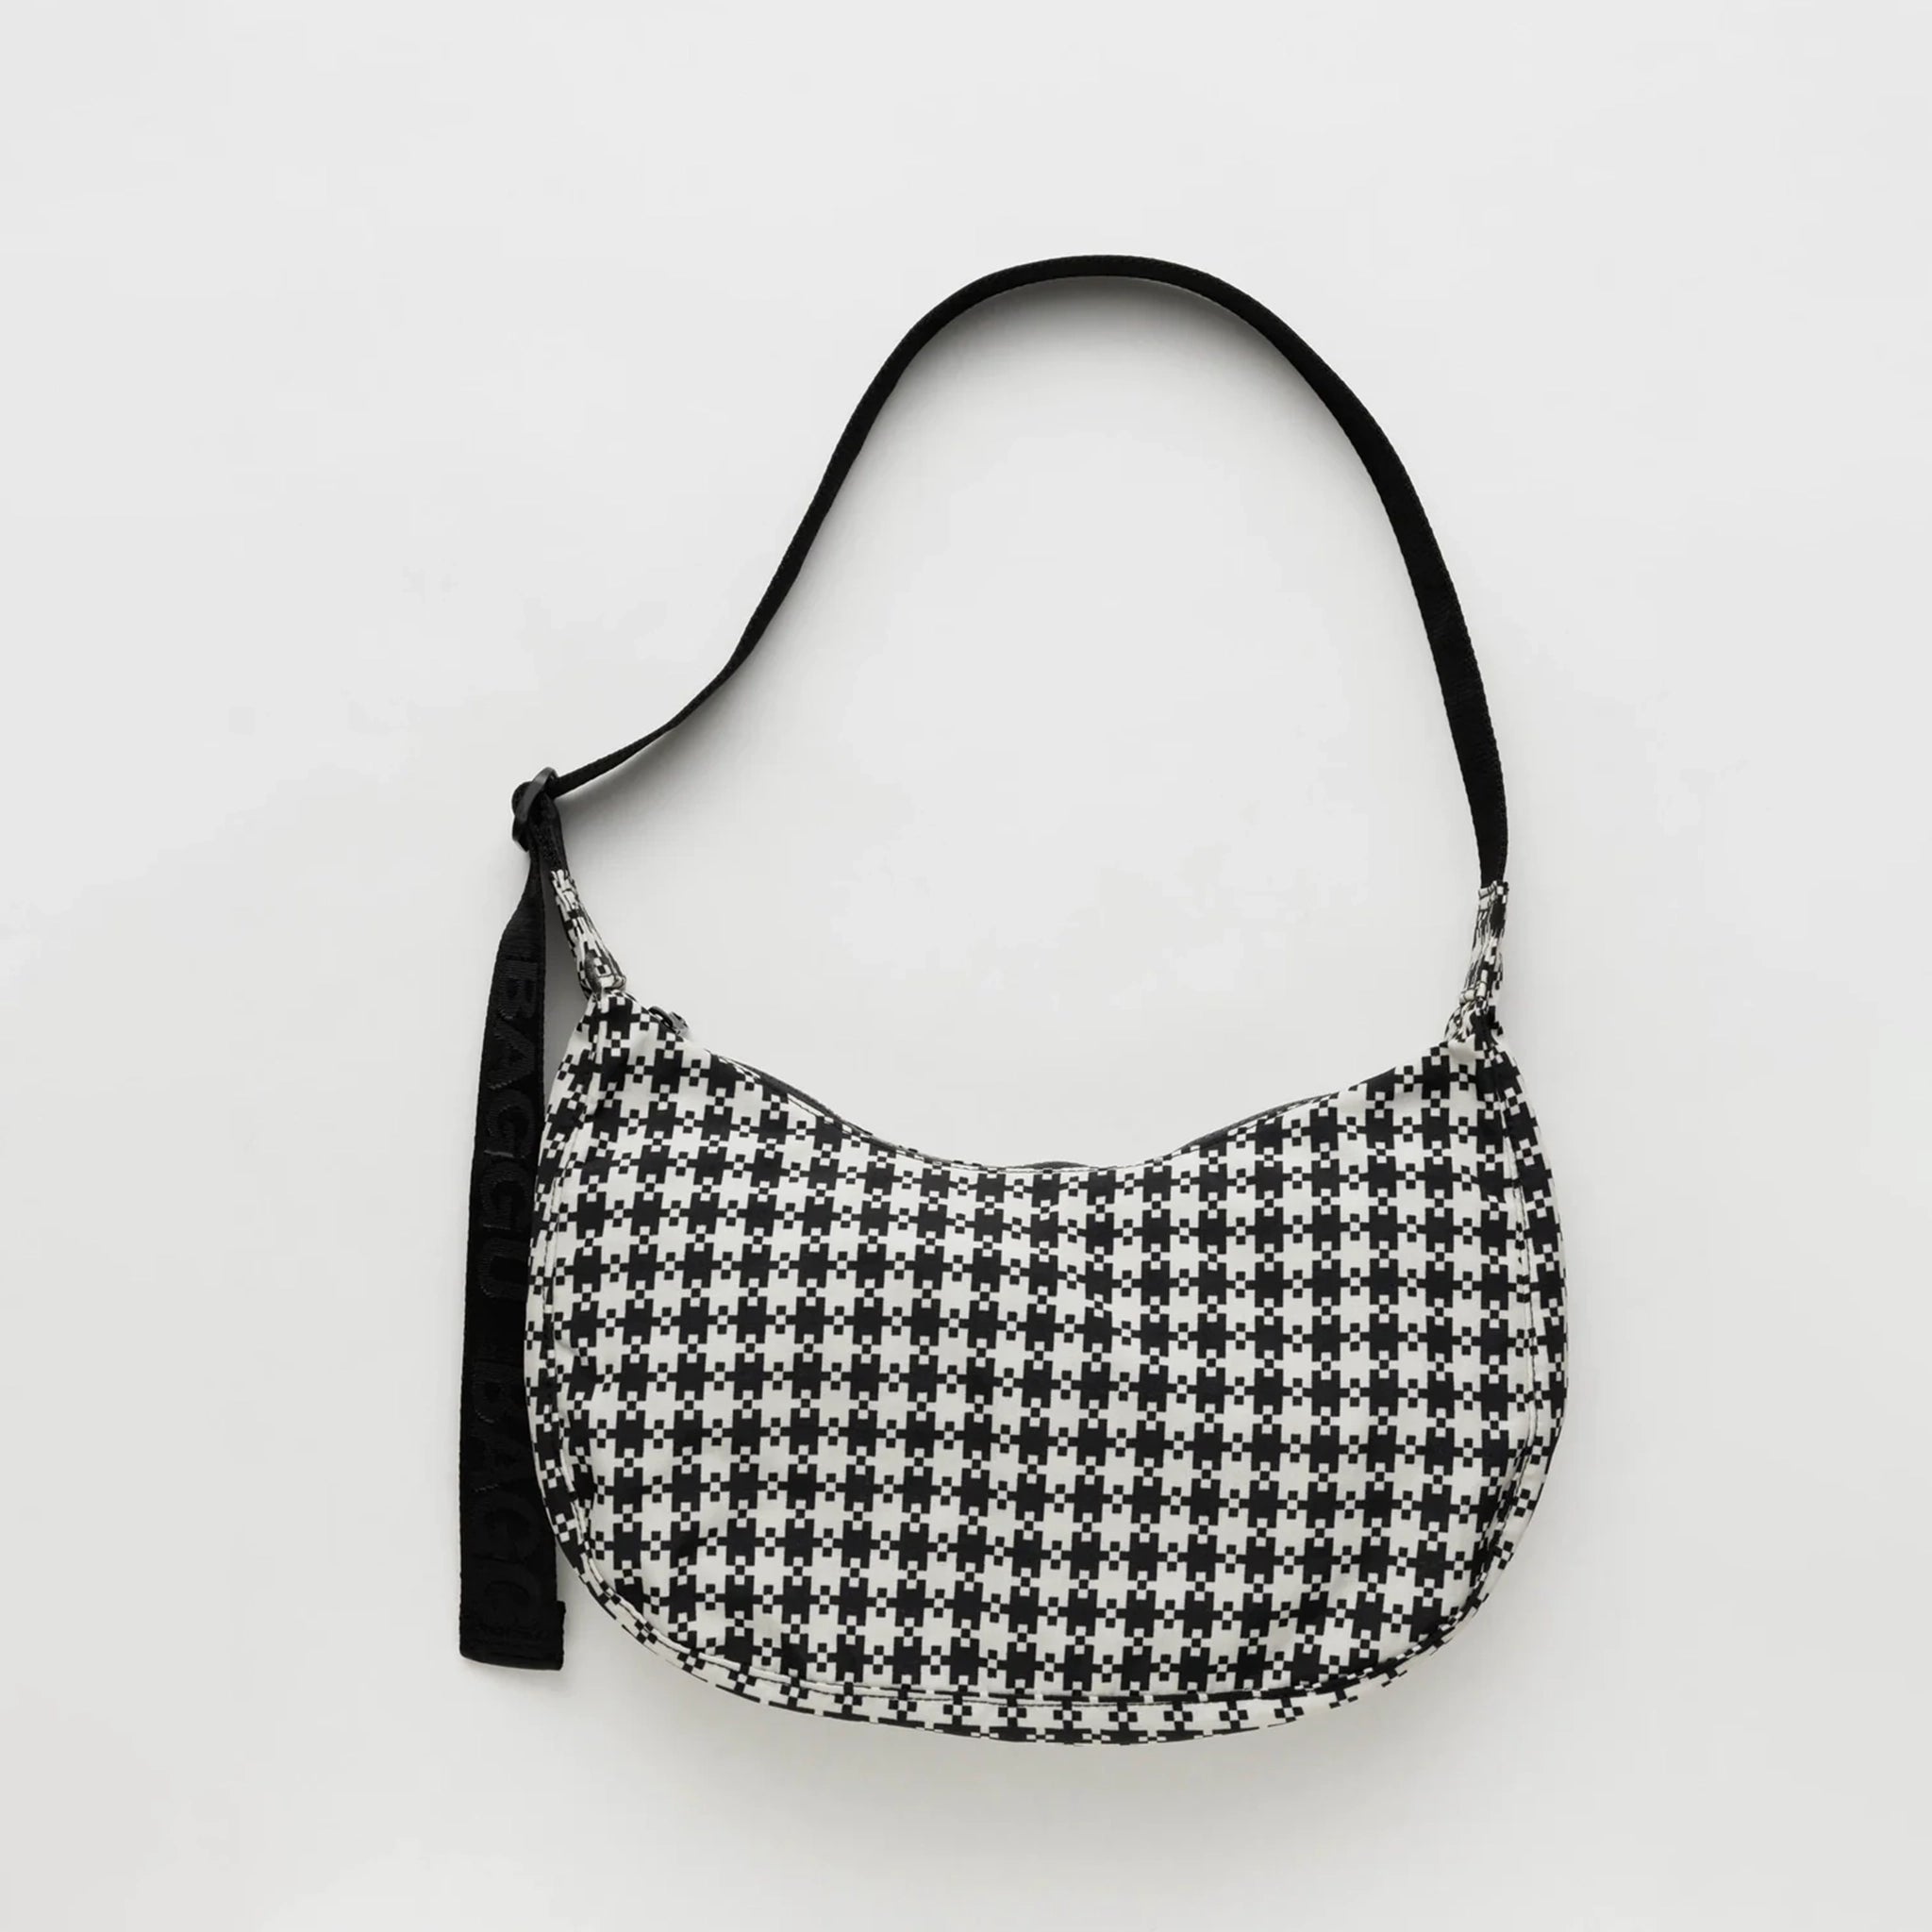 A black and white gingham nylon crescent shaped bag with an adjustable black strap that reads, "BAGGU" in black and a single zipper.